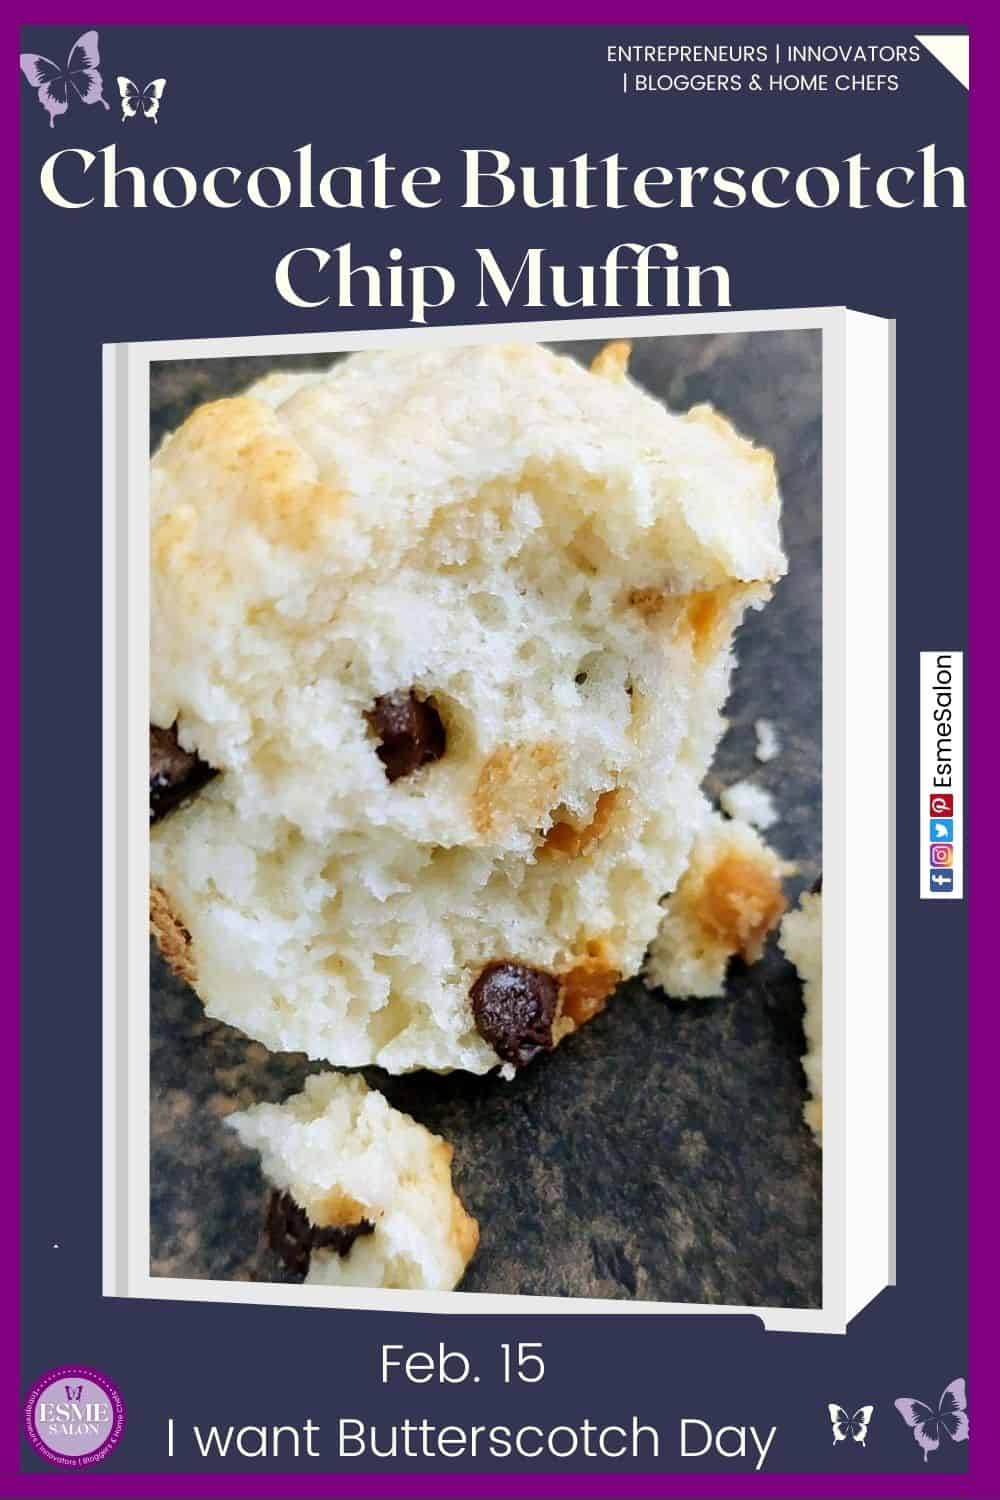 an image of a Chocolate and Butterscotch Chip Muffin